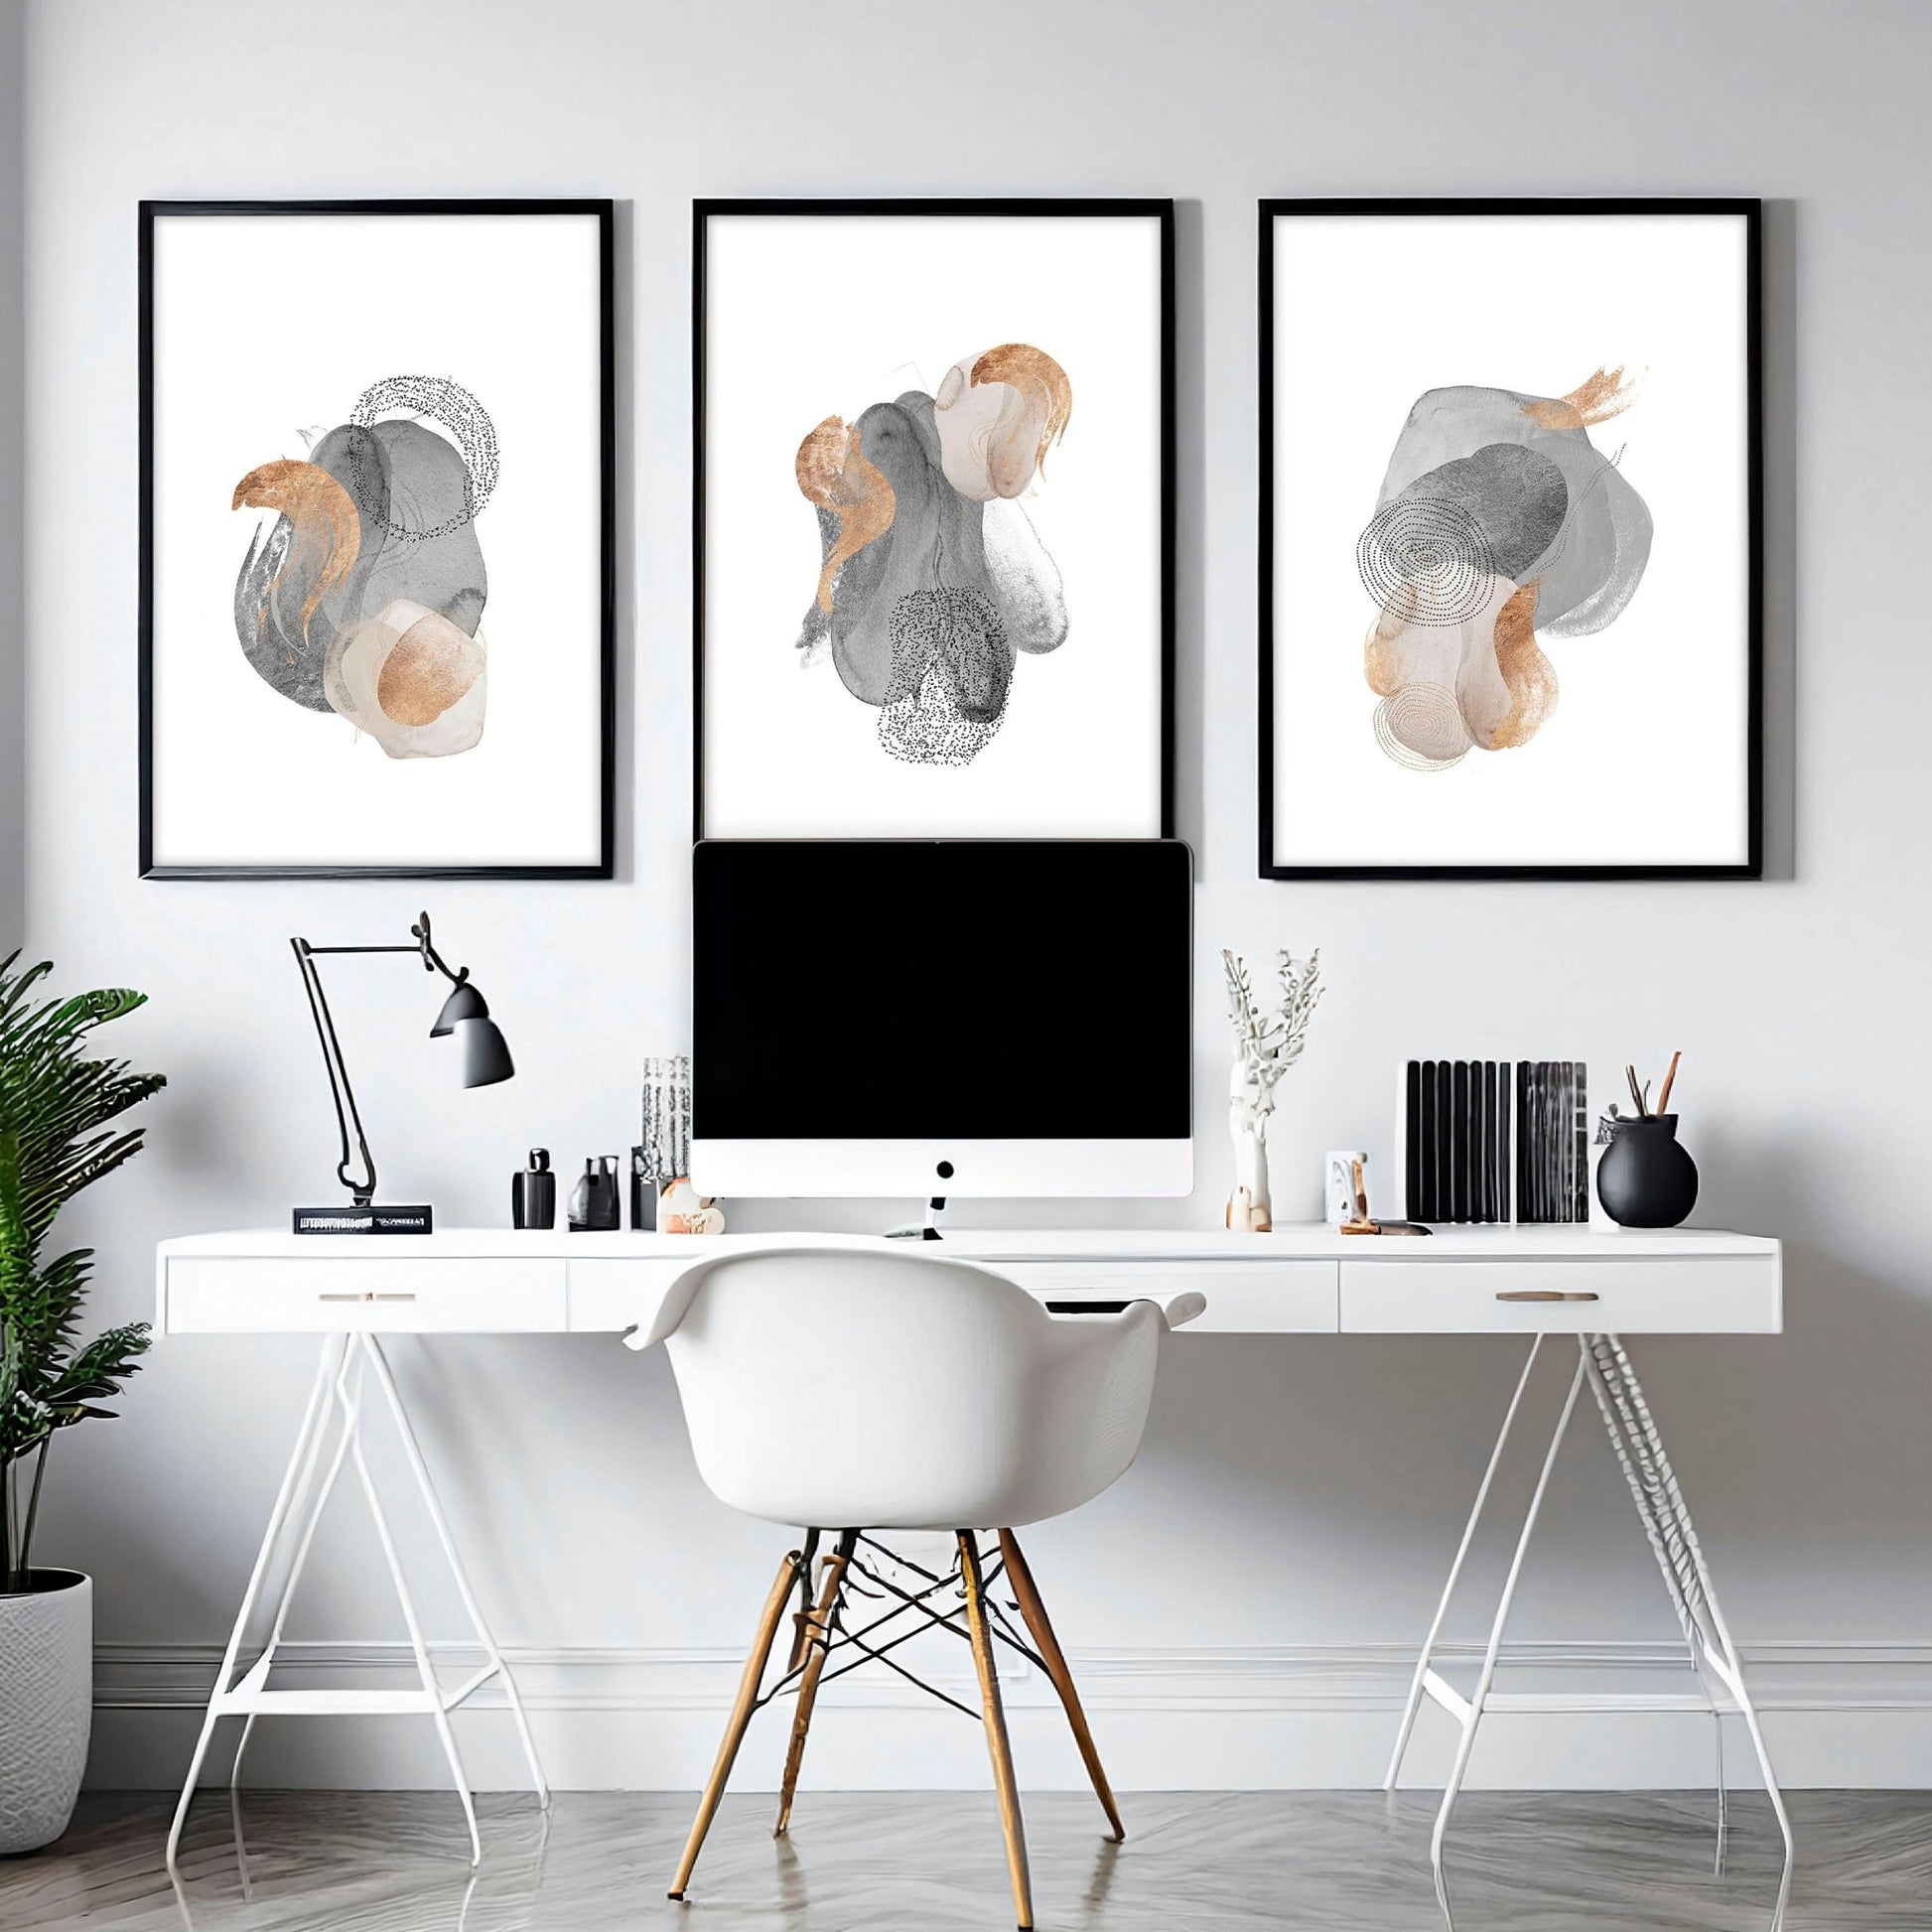 Prints for the office | set of 3 wall art prints - About Wall Art